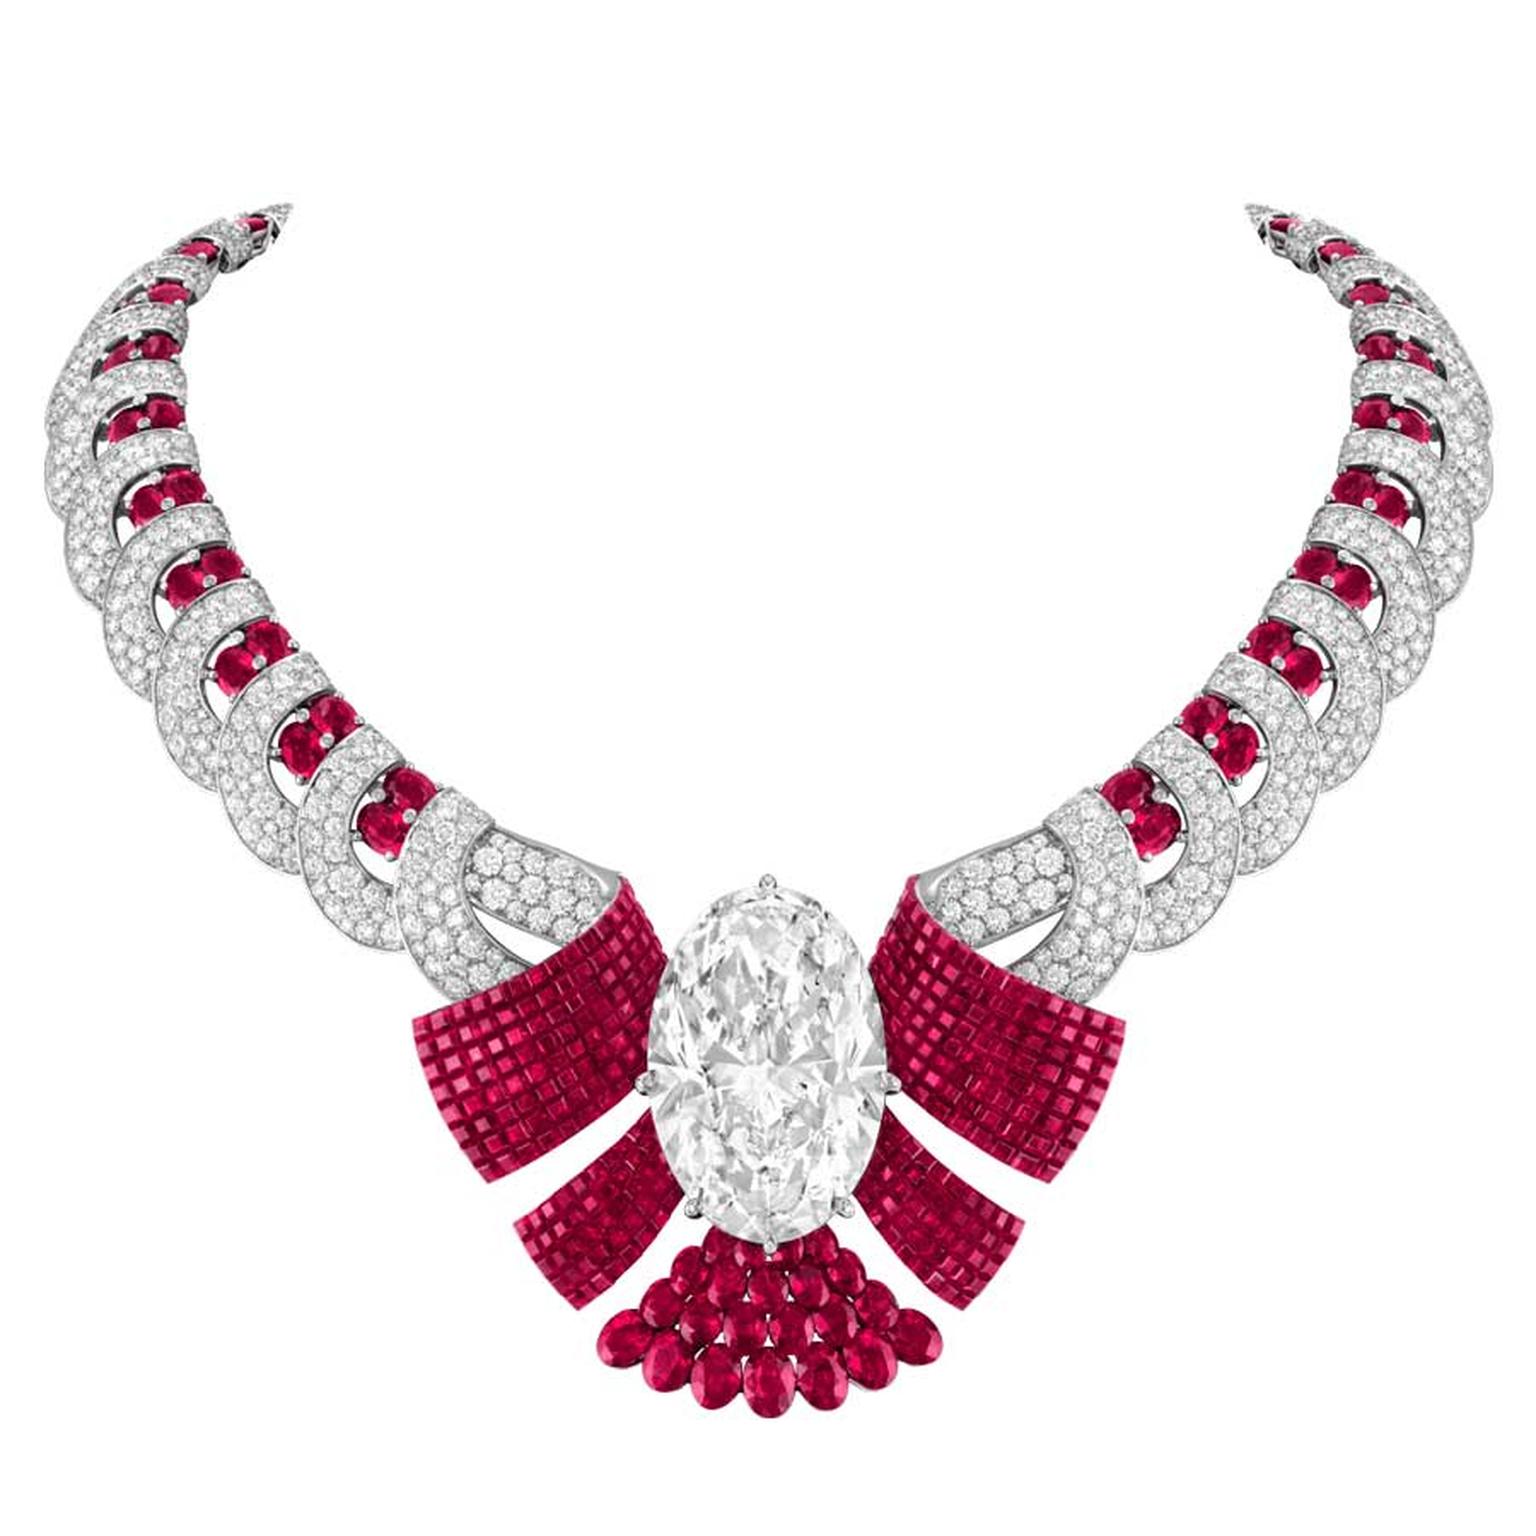 Atours Mysterieux ruby and diamond necklace Van Cleef and Arpels Legend of Diamonds 